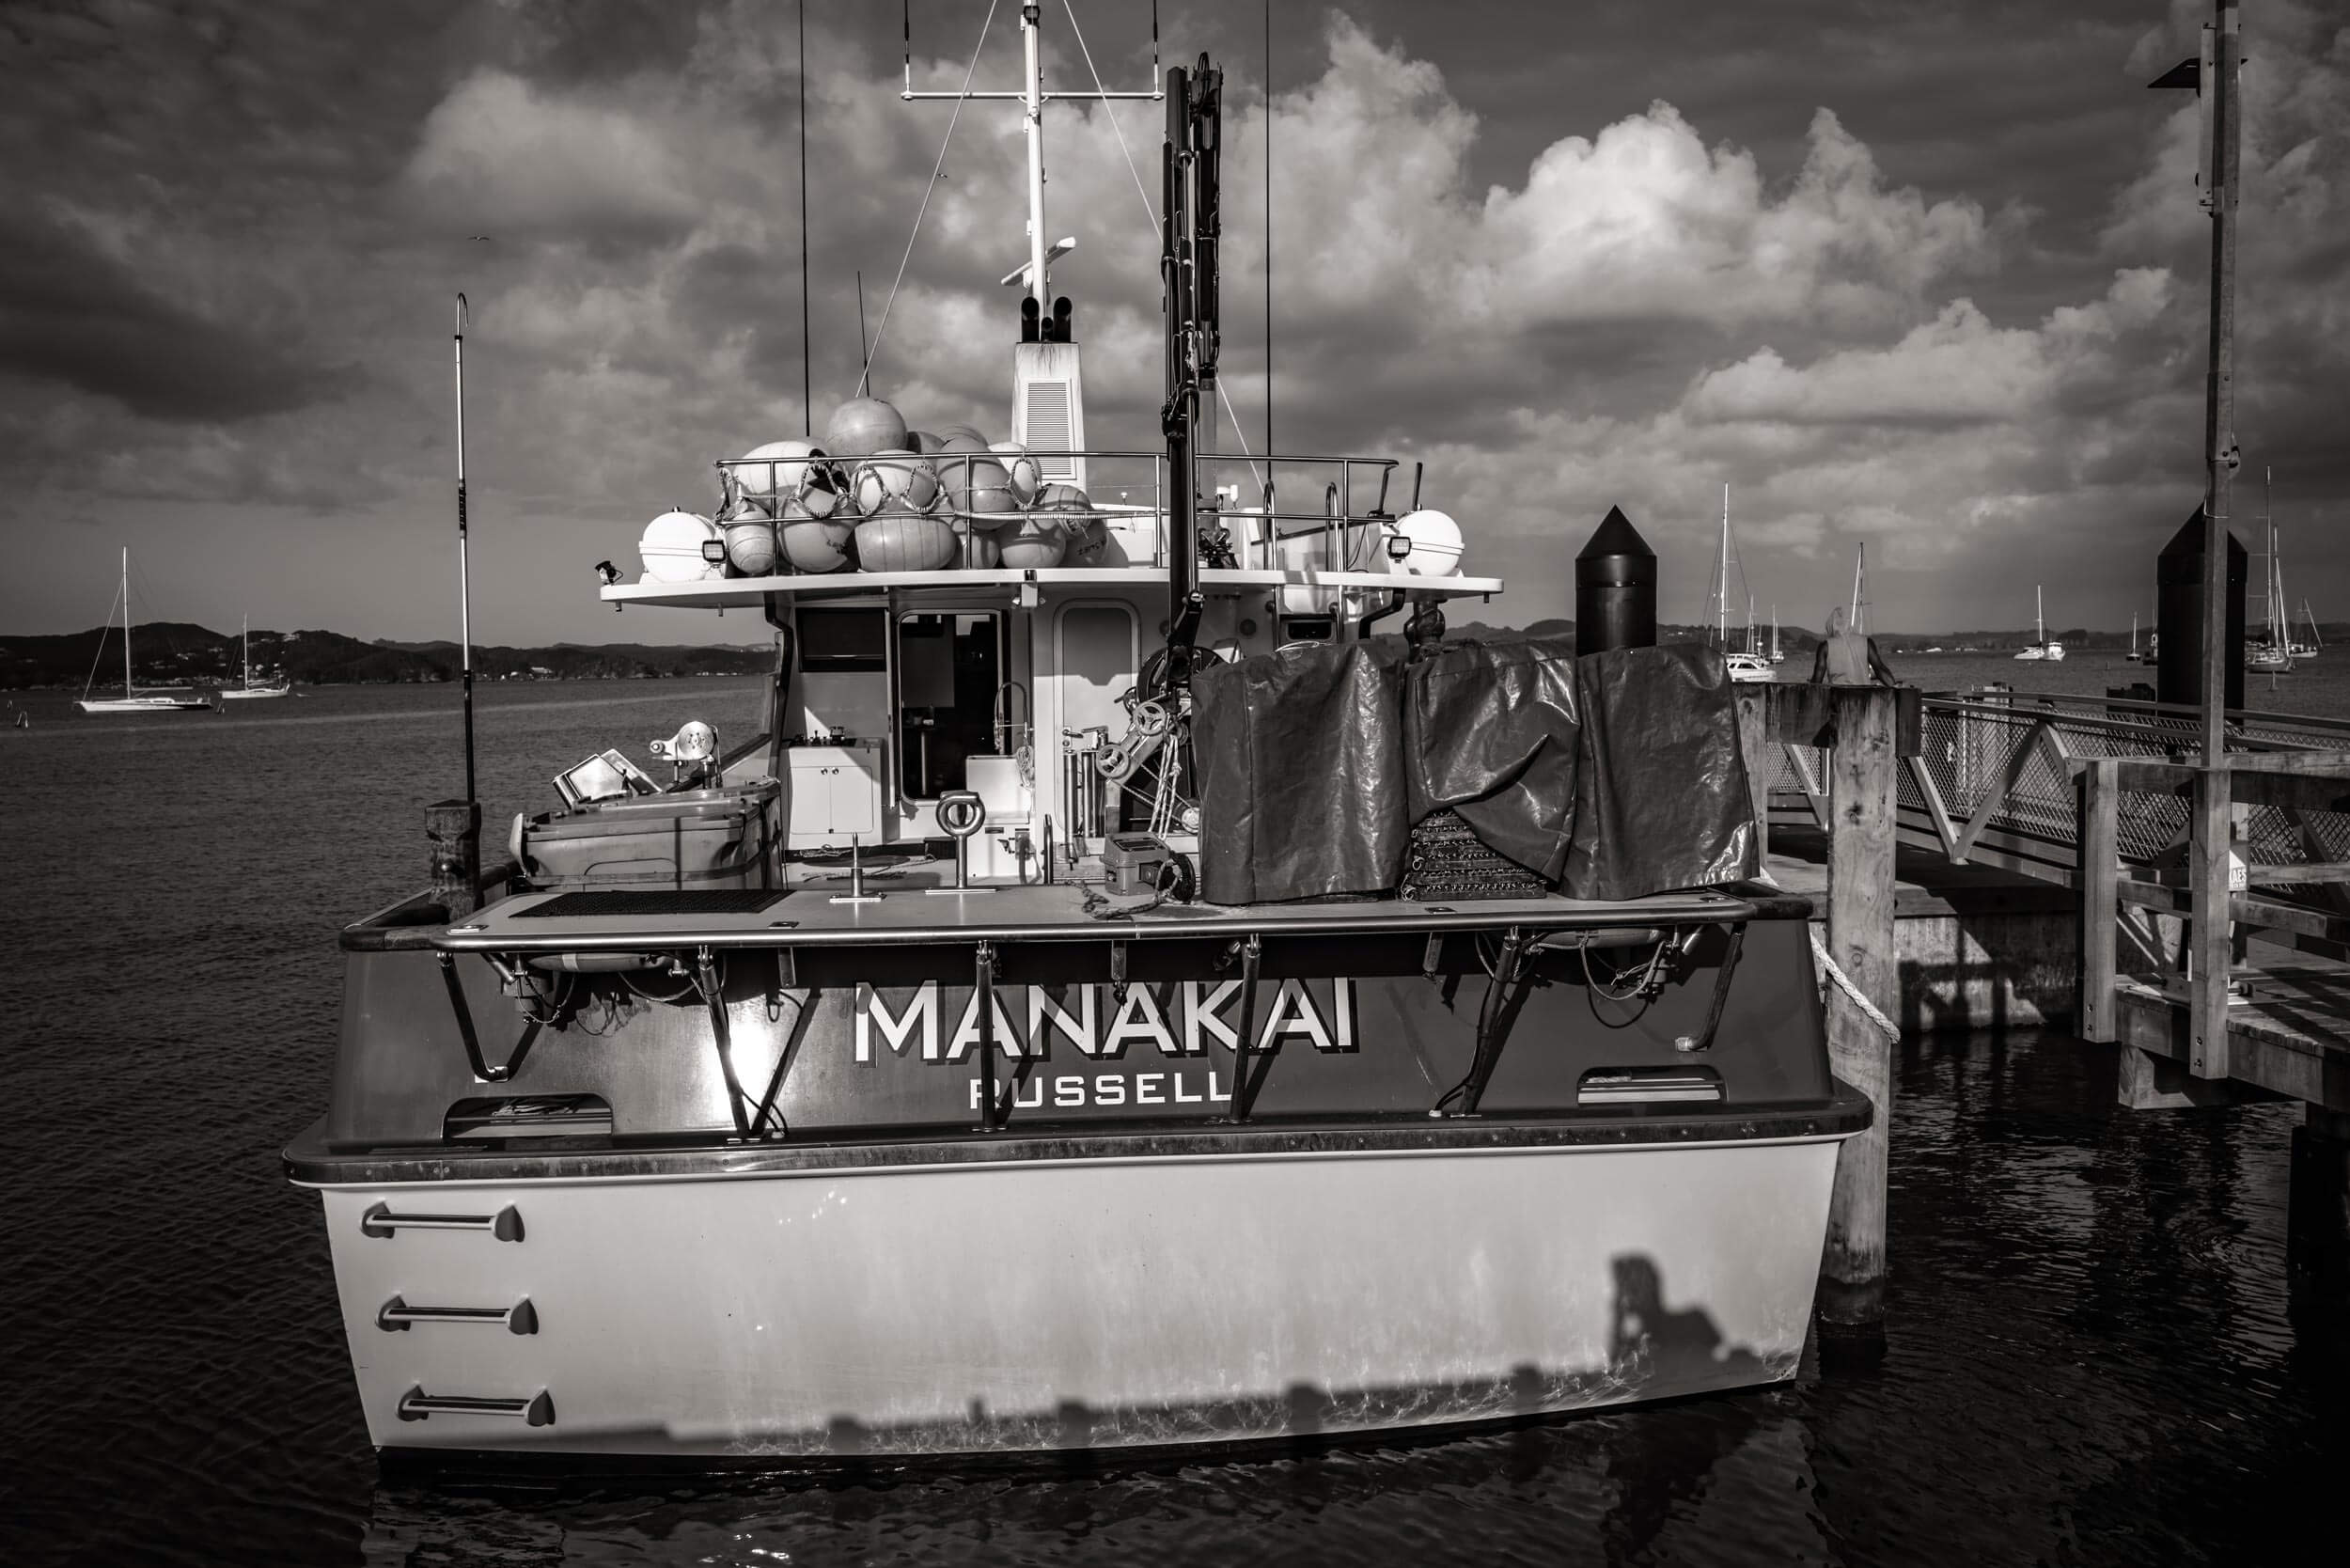 Aboard the Manakai, Russell